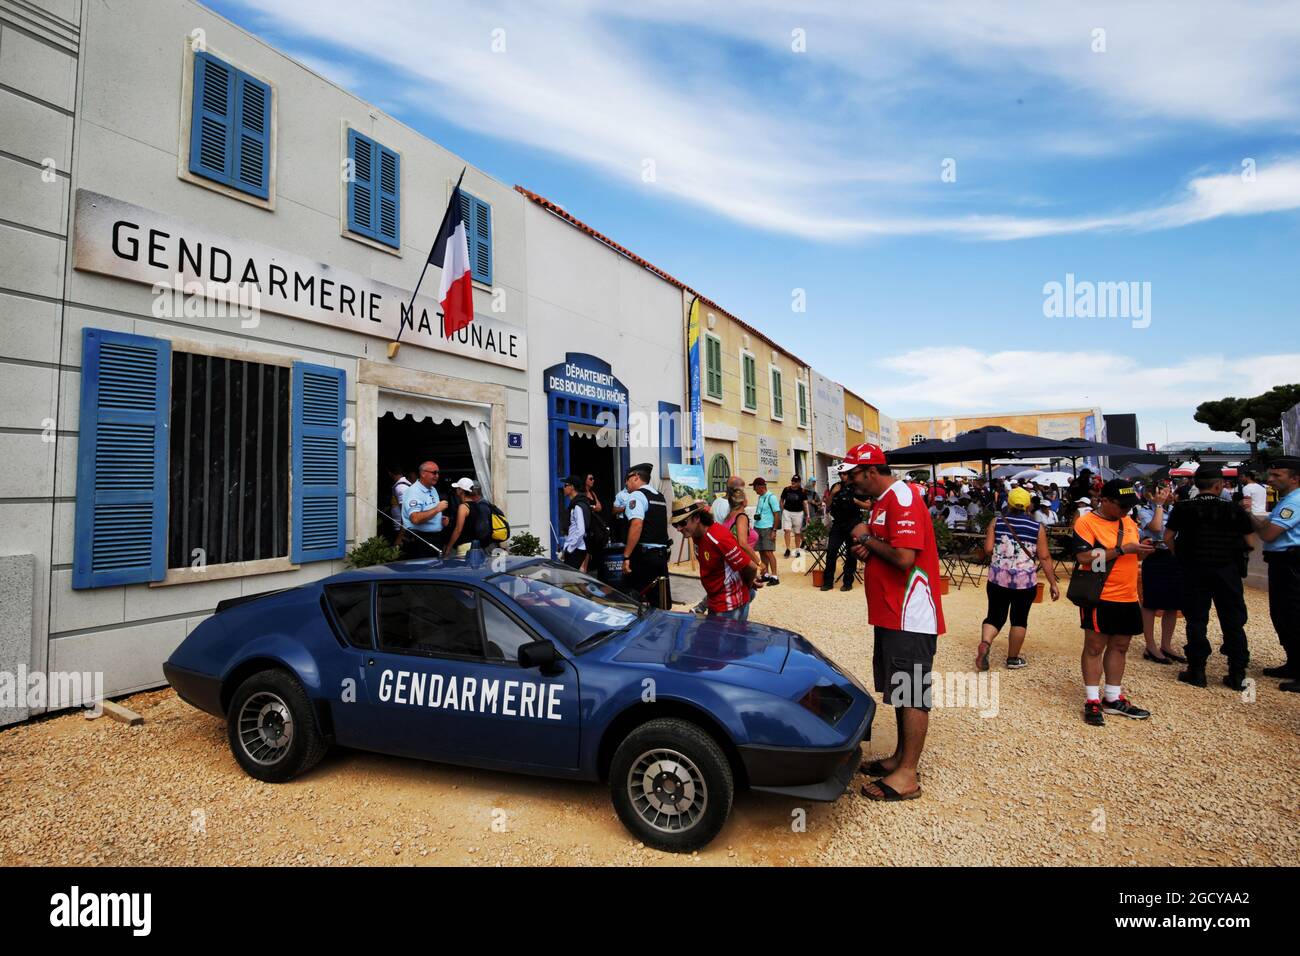 Fans and atmosphere - classic Renault car. French Grand Prix, Sunday 24th June 2018. Paul Ricard, France. Stock Photo